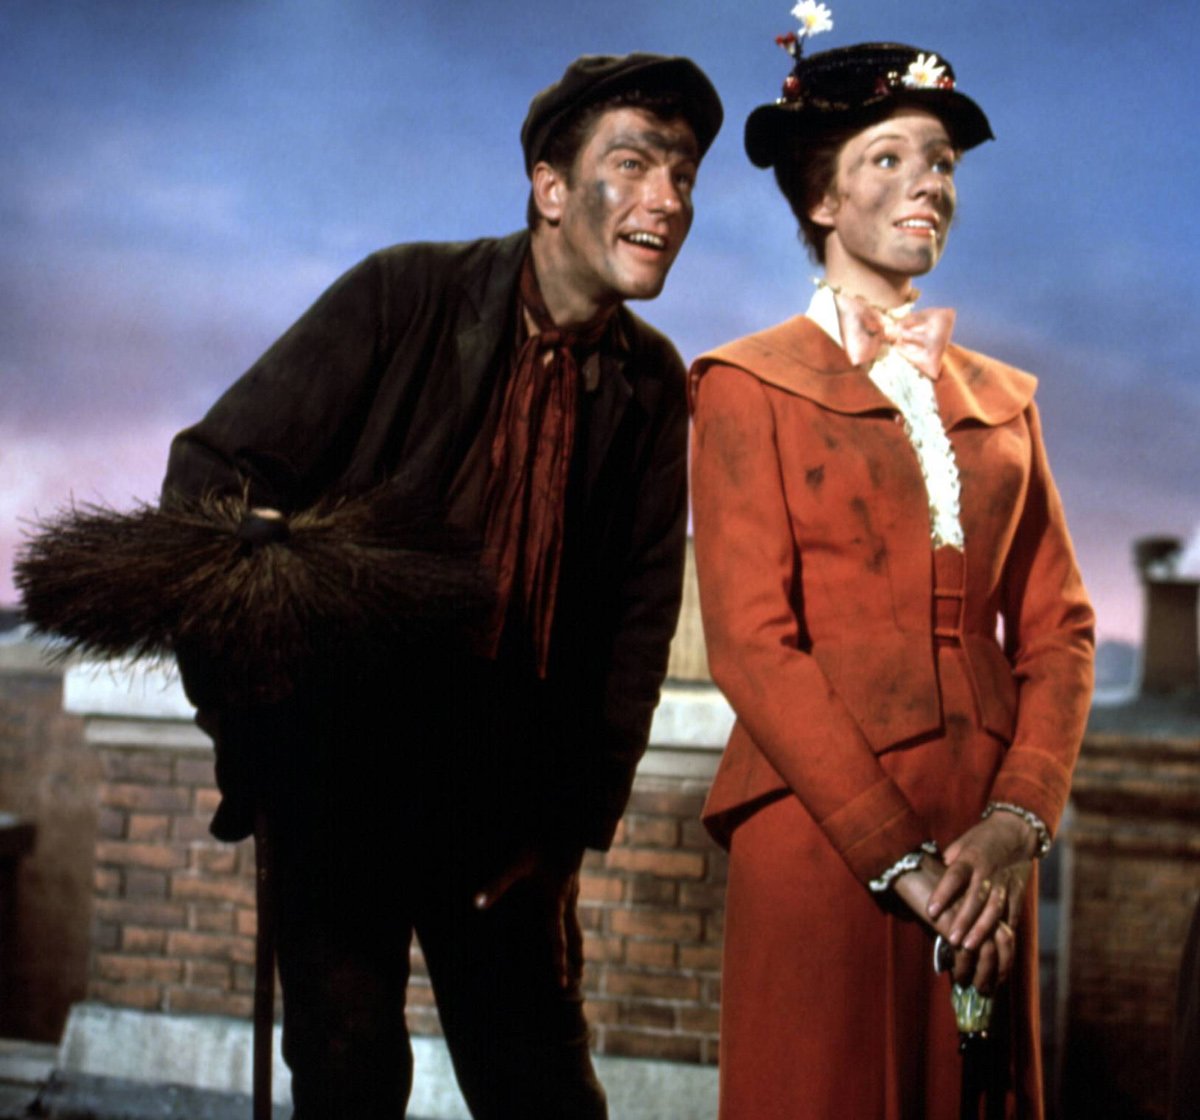 Actress Julie Andrews and Dick Van Dyke in a scene from the movie"Mary Poppins"